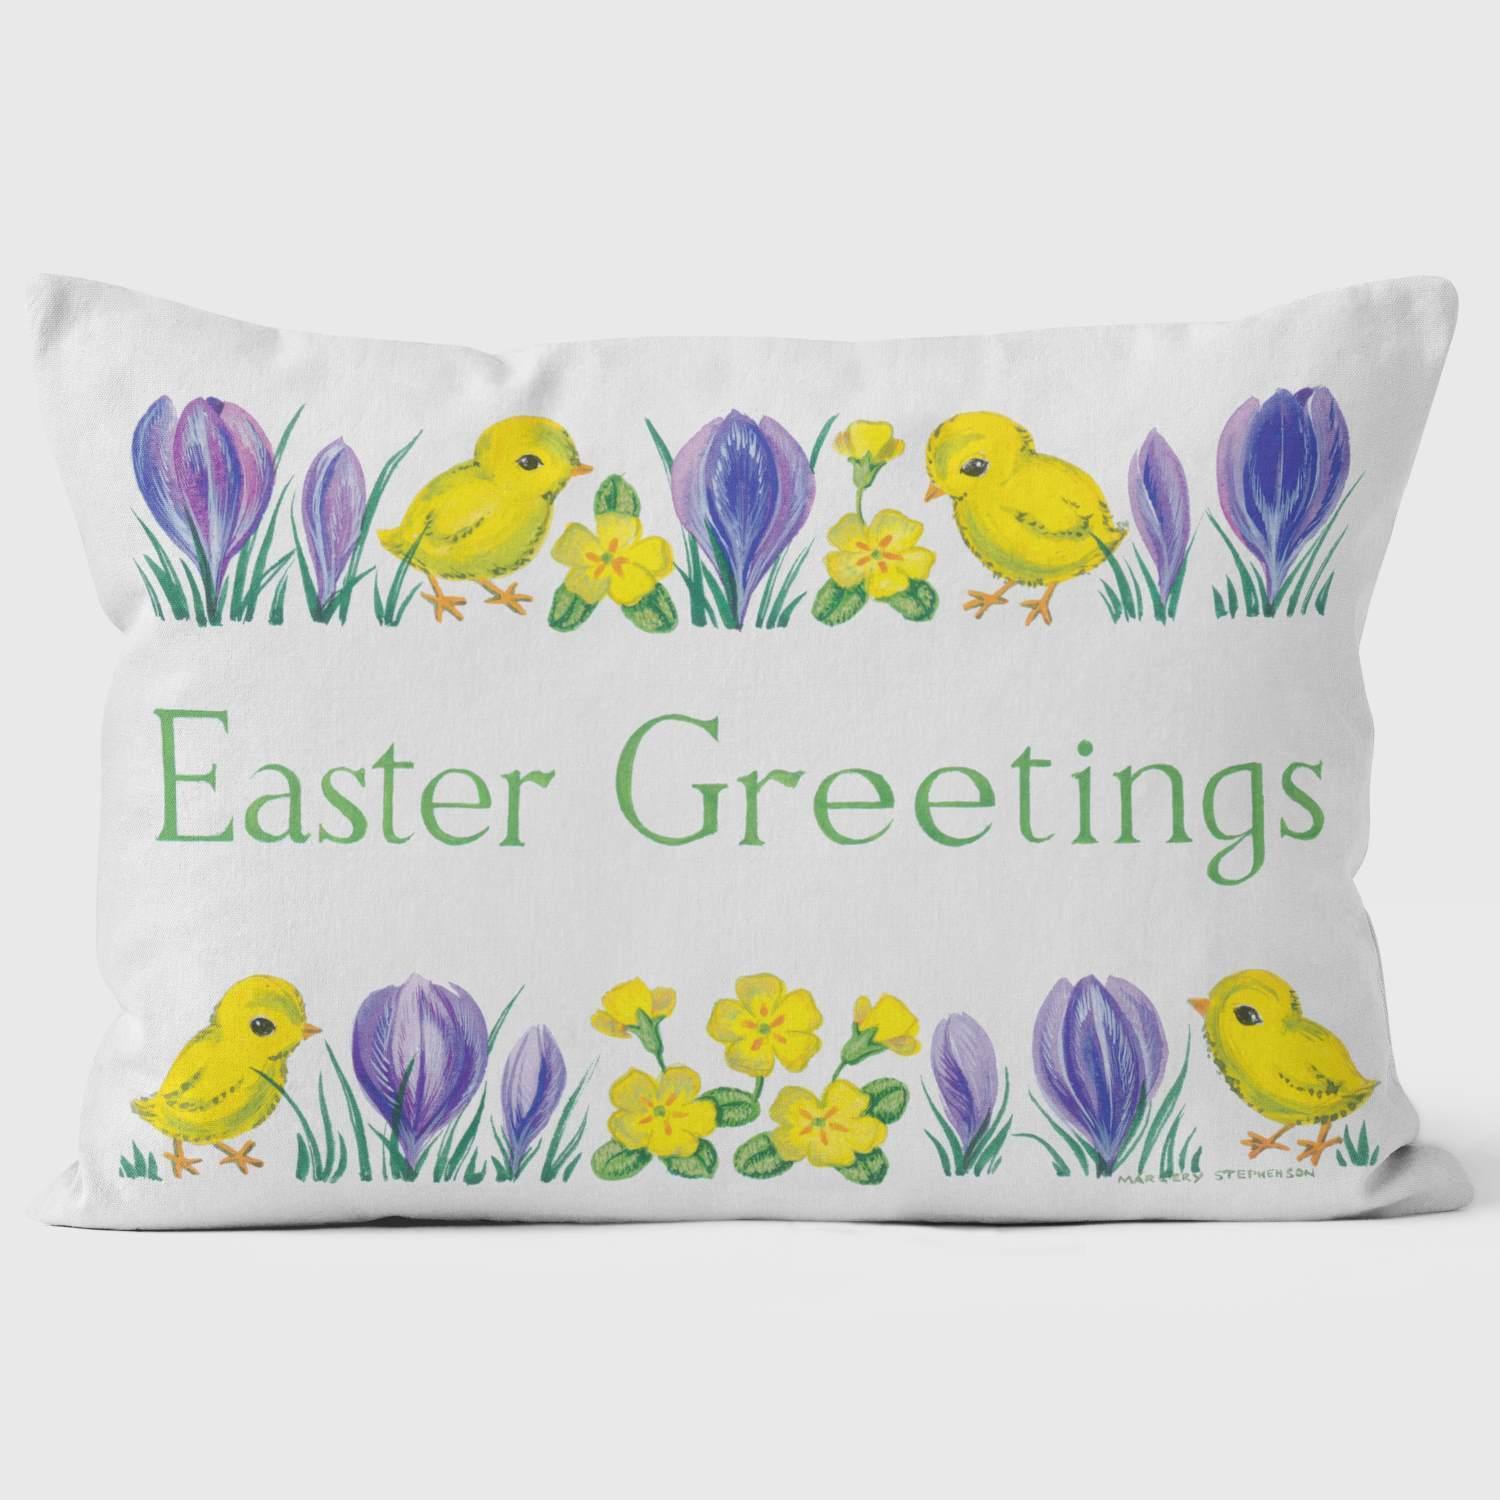 Easter Greetings - Special Occasions Cushion - Handmade Cushions UK - WeLoveCushions